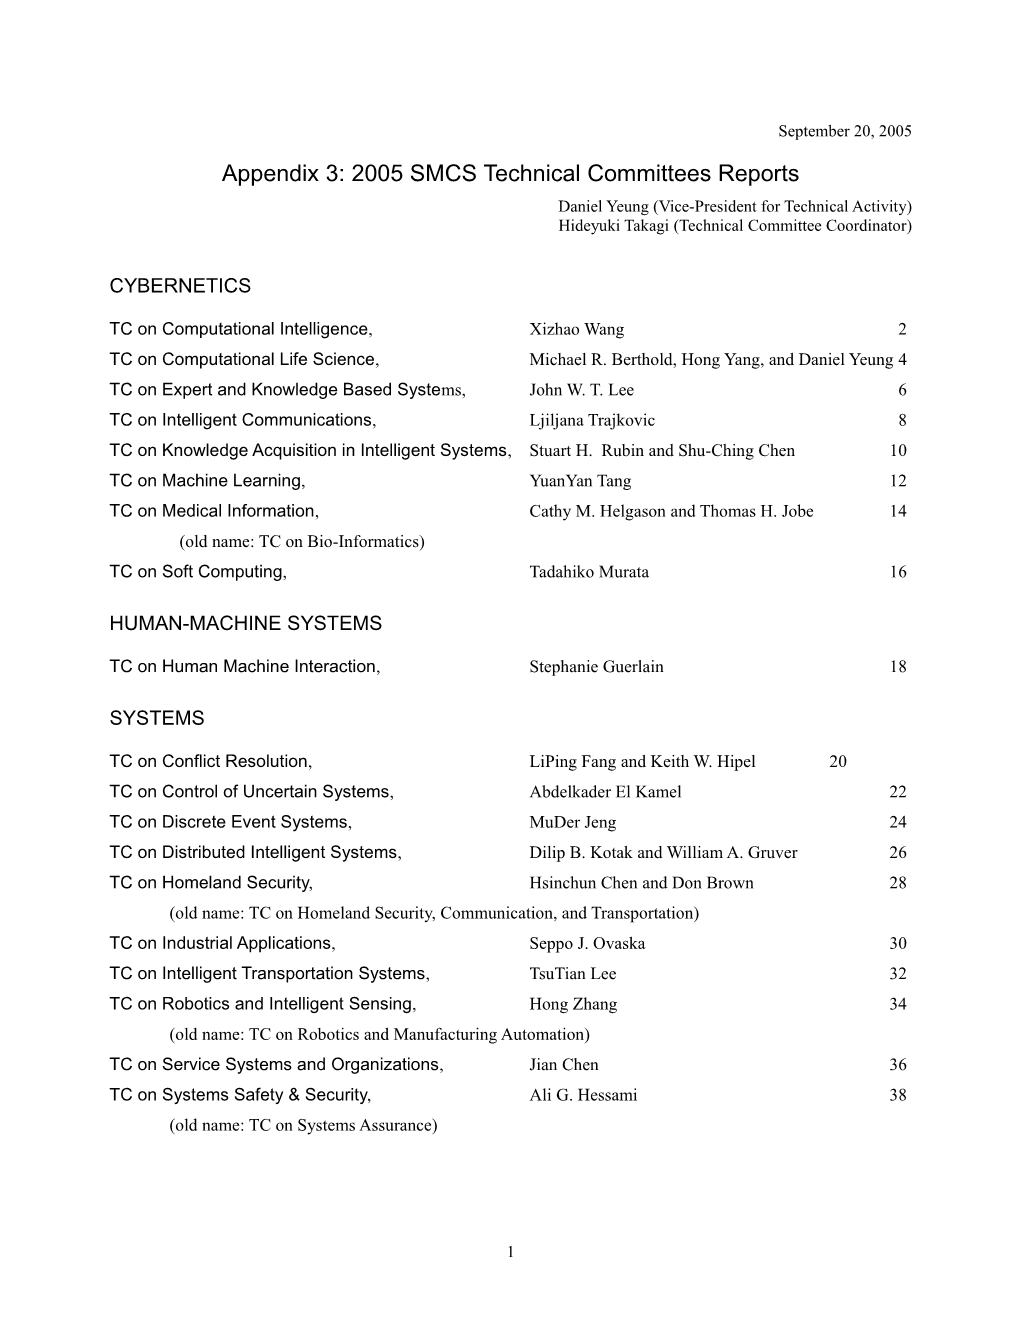 Report on the SMC Technical Committee